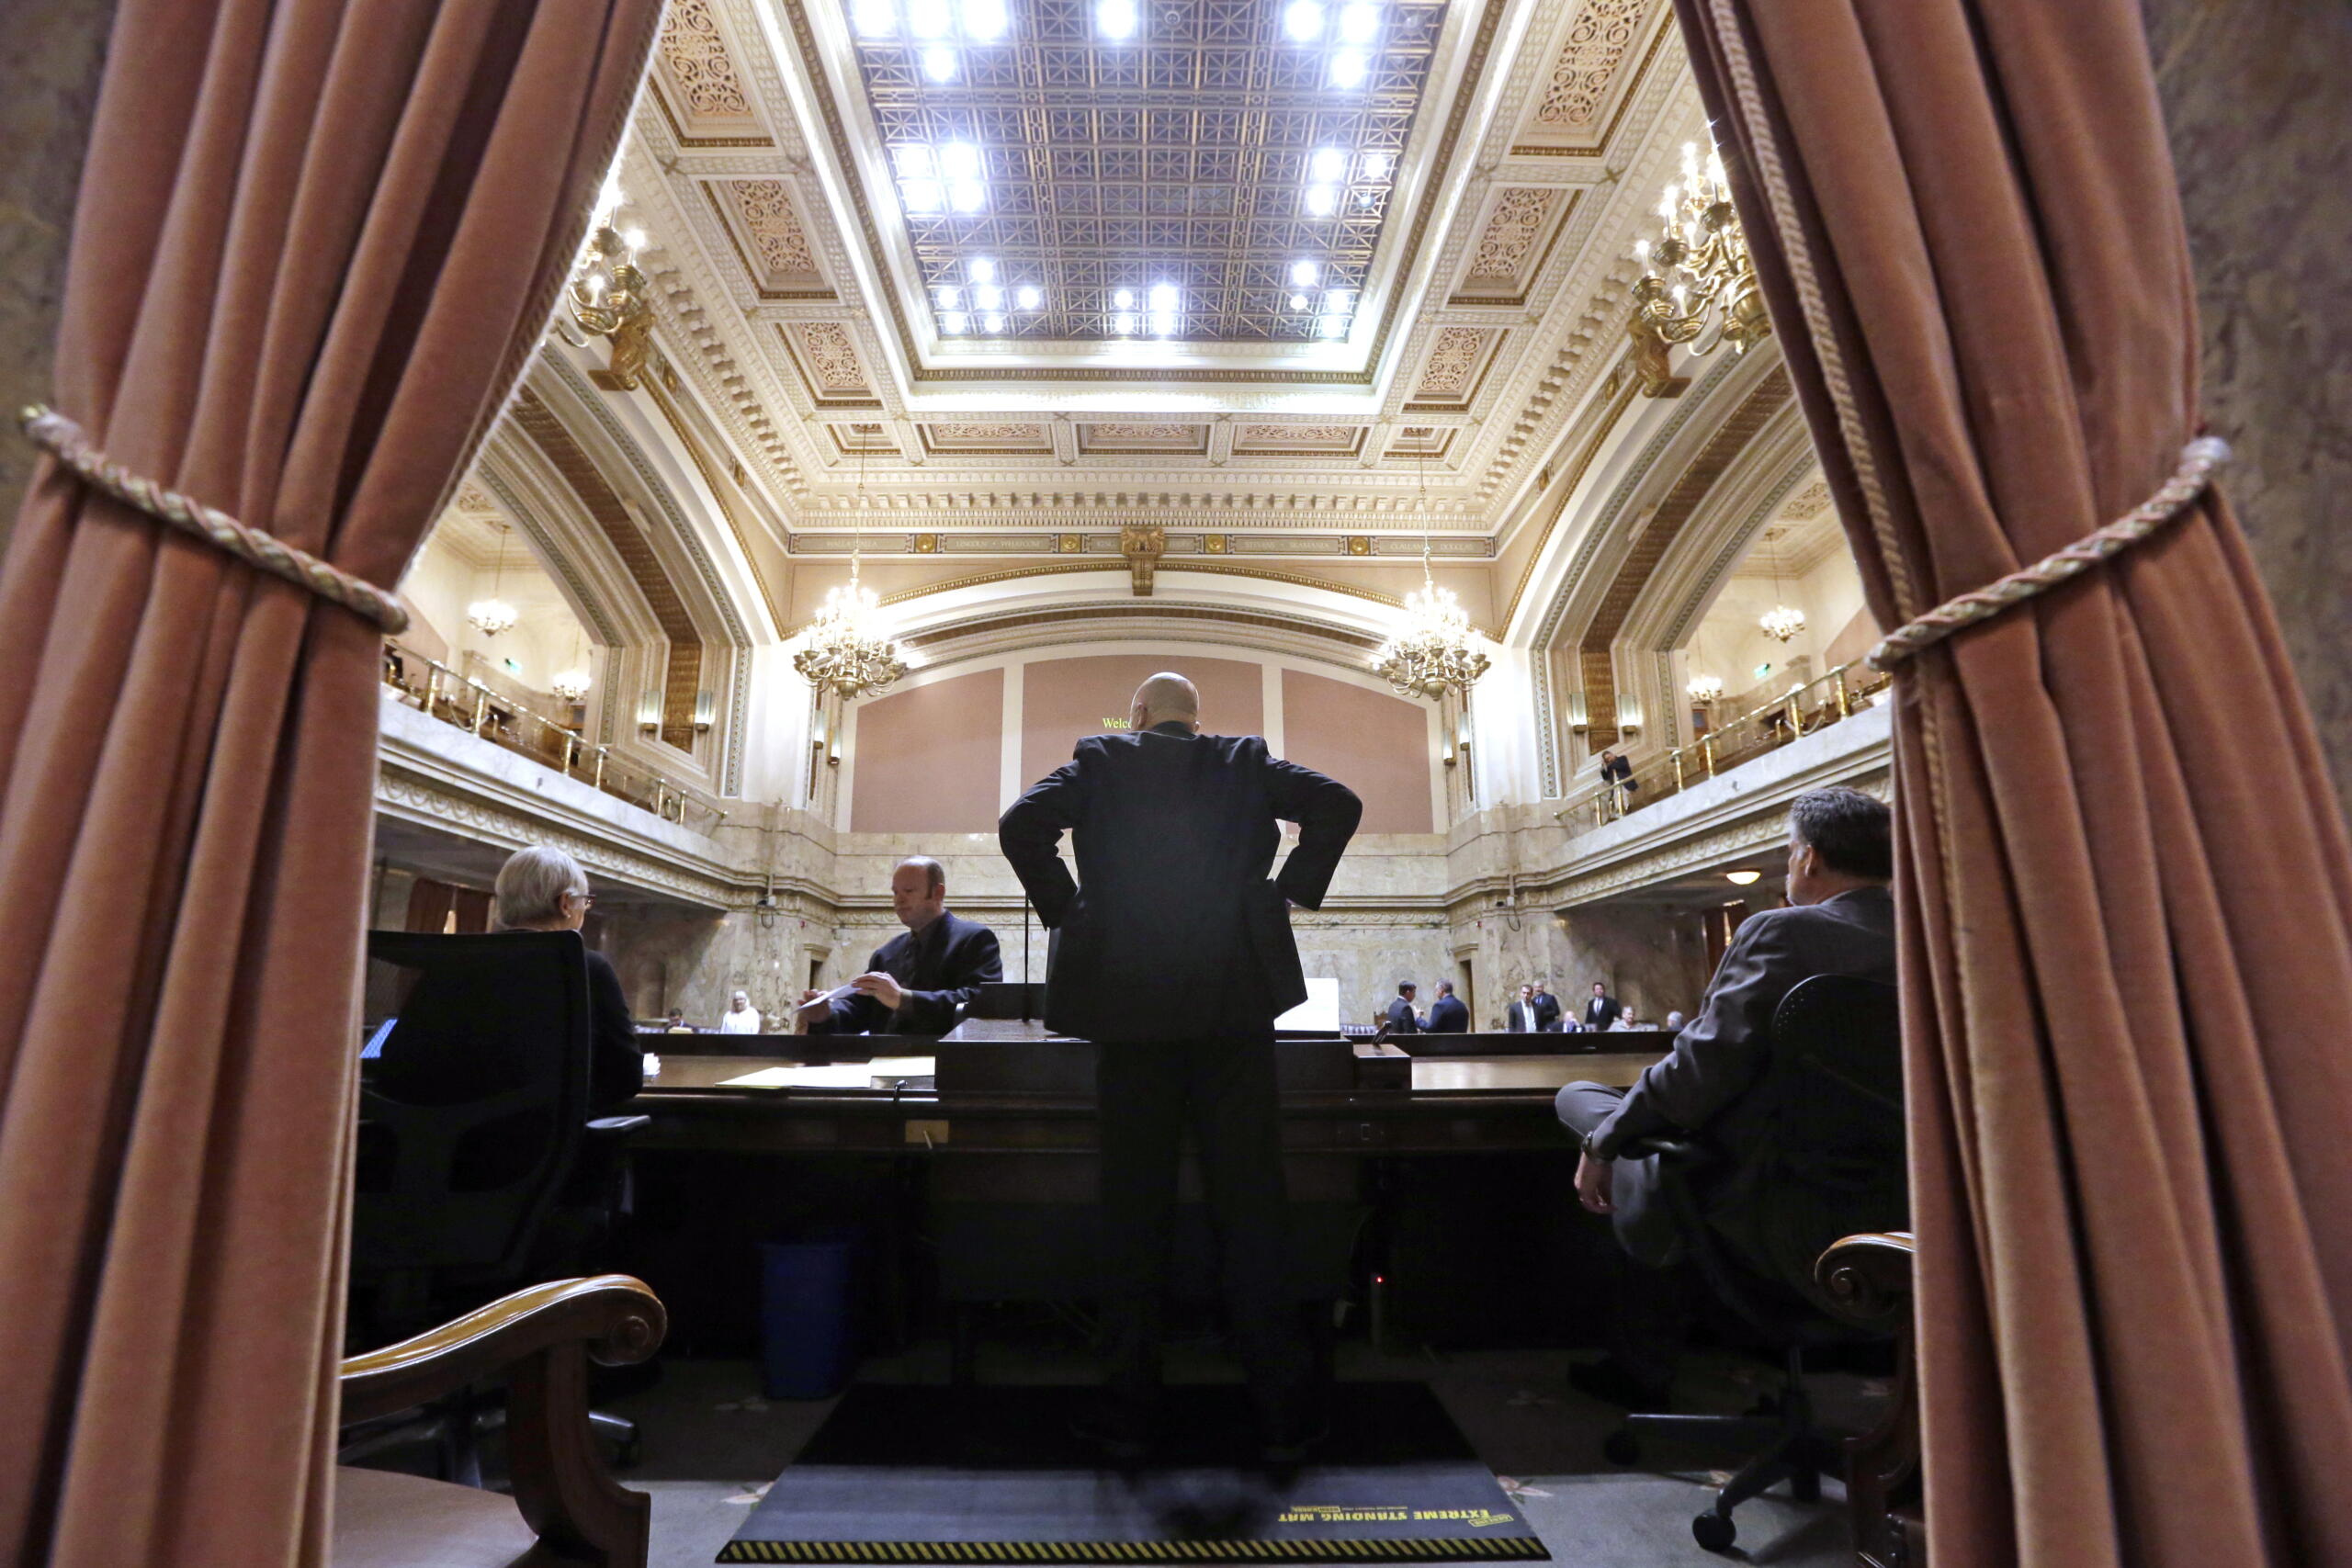 House Speaker Pro Tempore Jim Moeller looks out over the House Chamber moments before the start of a 30-day special session of the Legislature Wednesday, April 29, 2015, in Olympia. Moeller died Wednesday following a years-long battle with Parkinson’s disease.